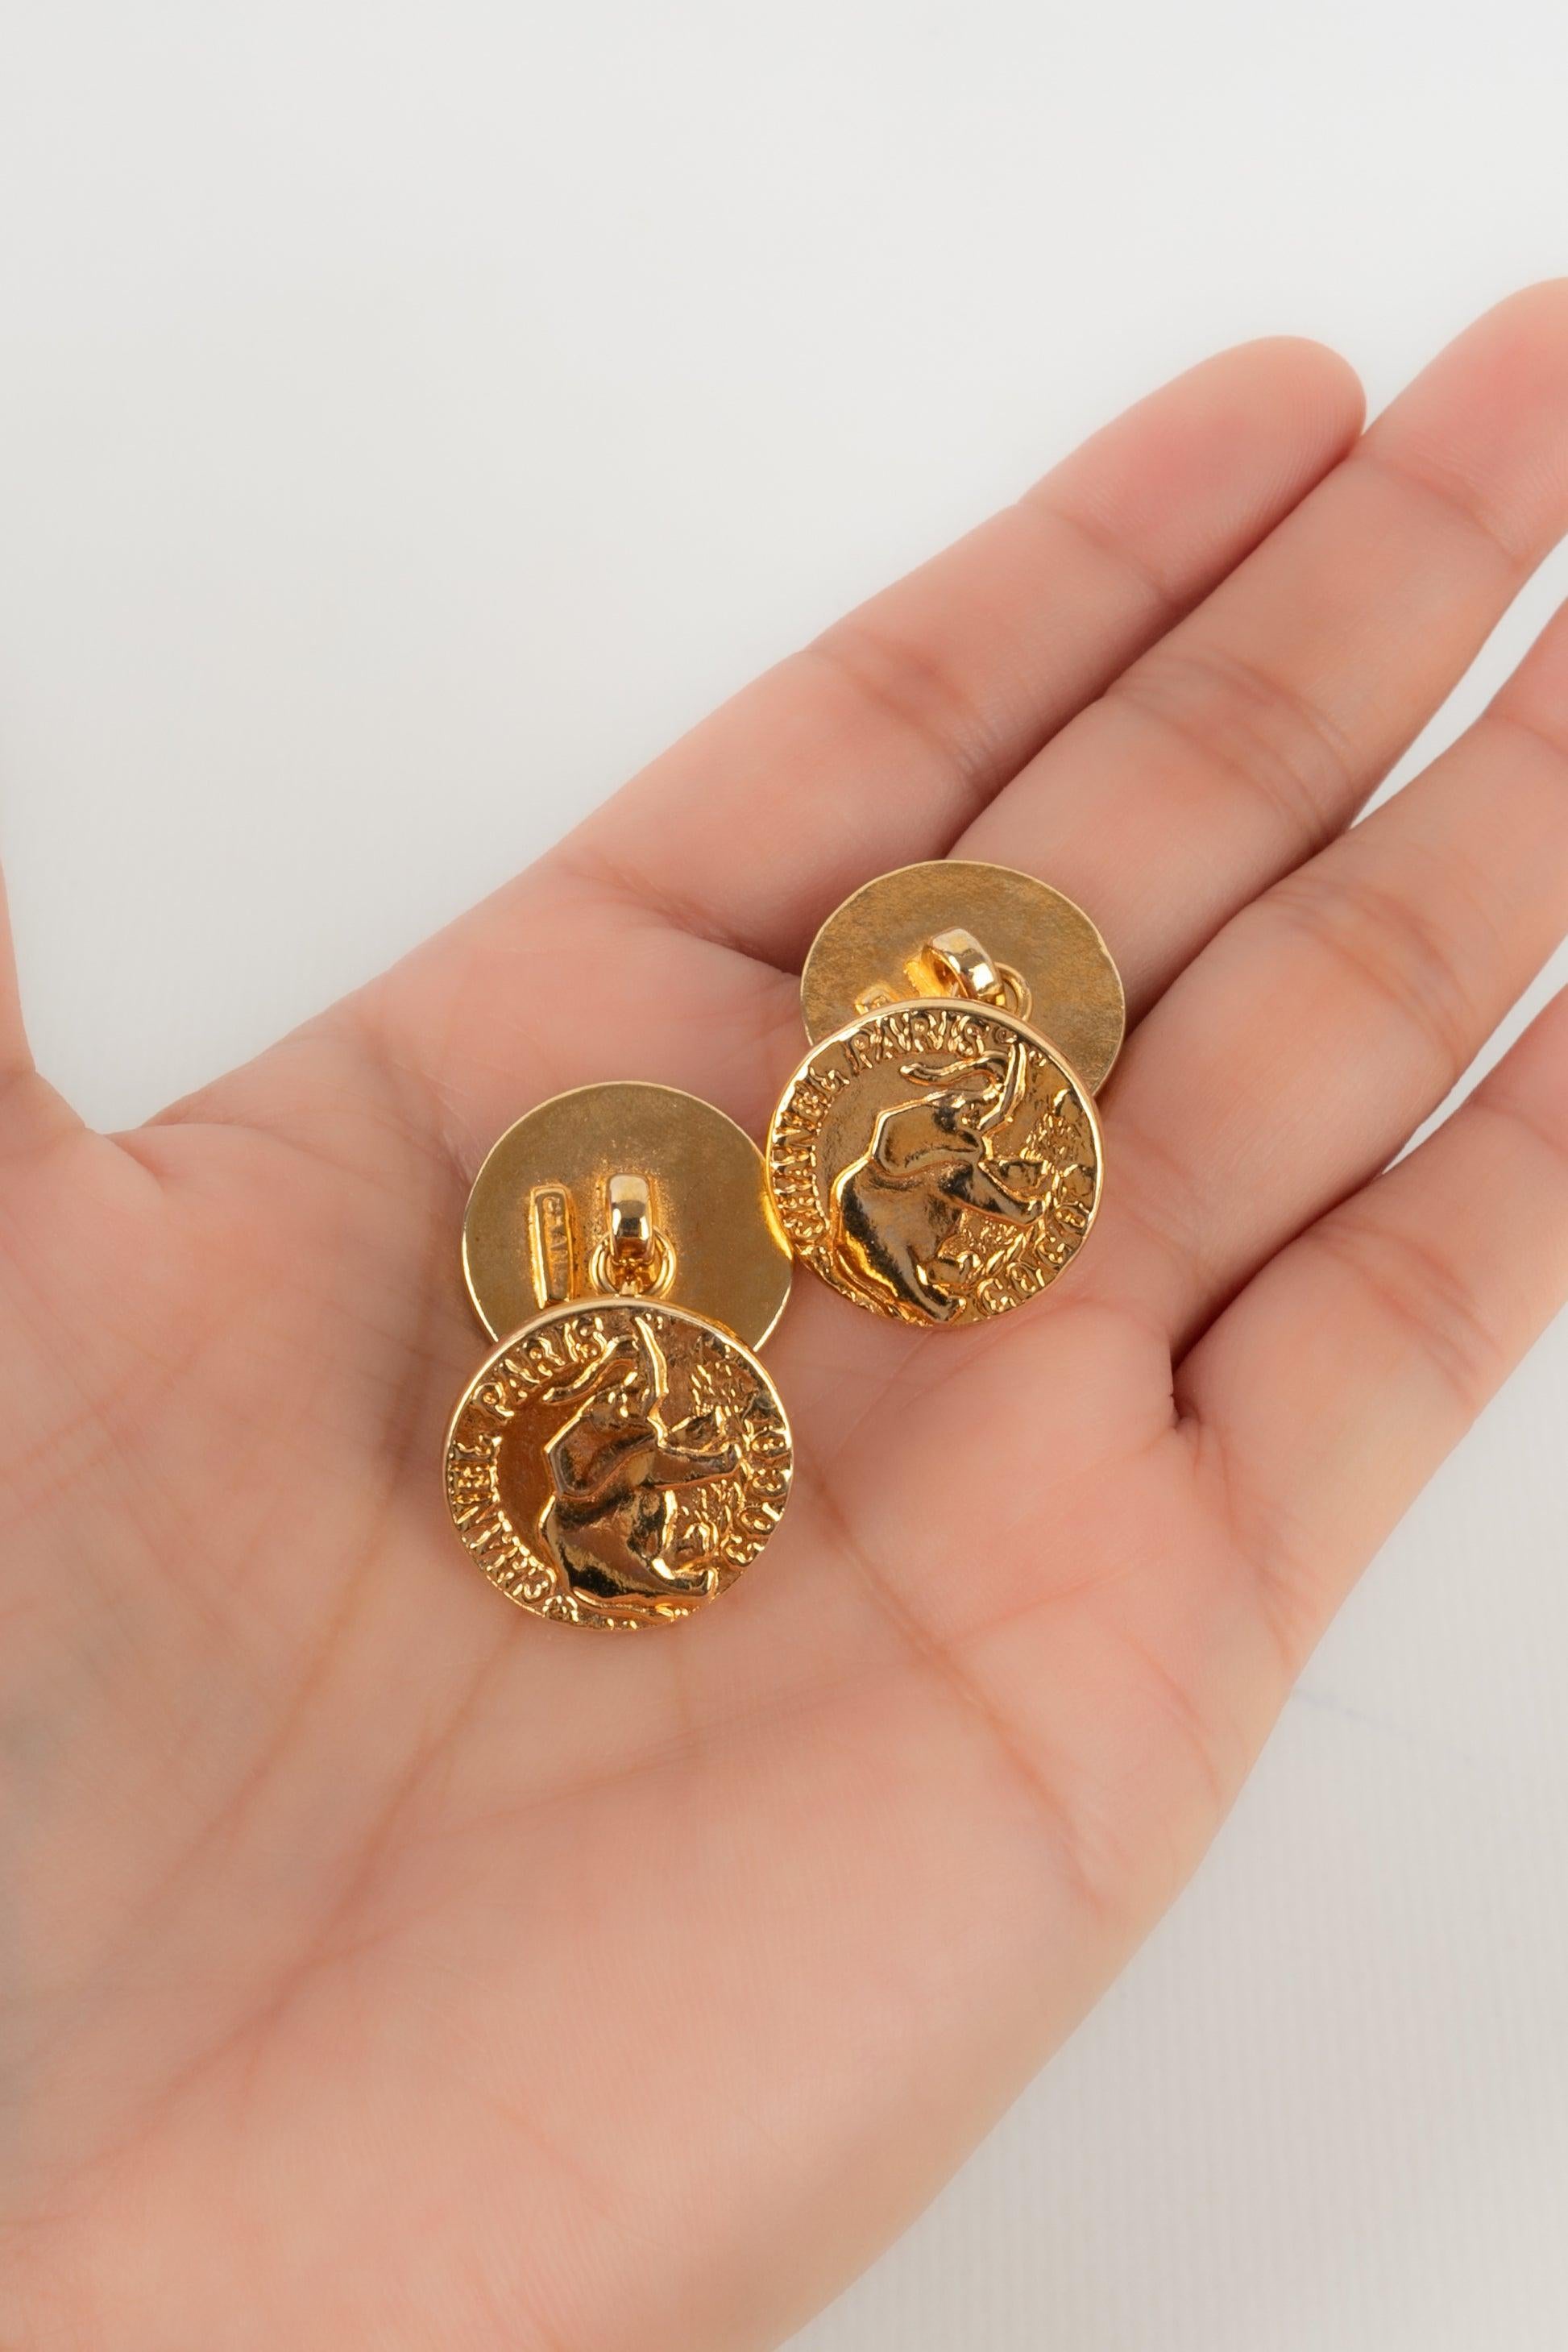 Chanel - Engraved golden metal cufflinks representing an elephant.

Additional information:
Condition: Very good condition
Dimensions: Diameter: 2 cm

Seller Reference: ACC133